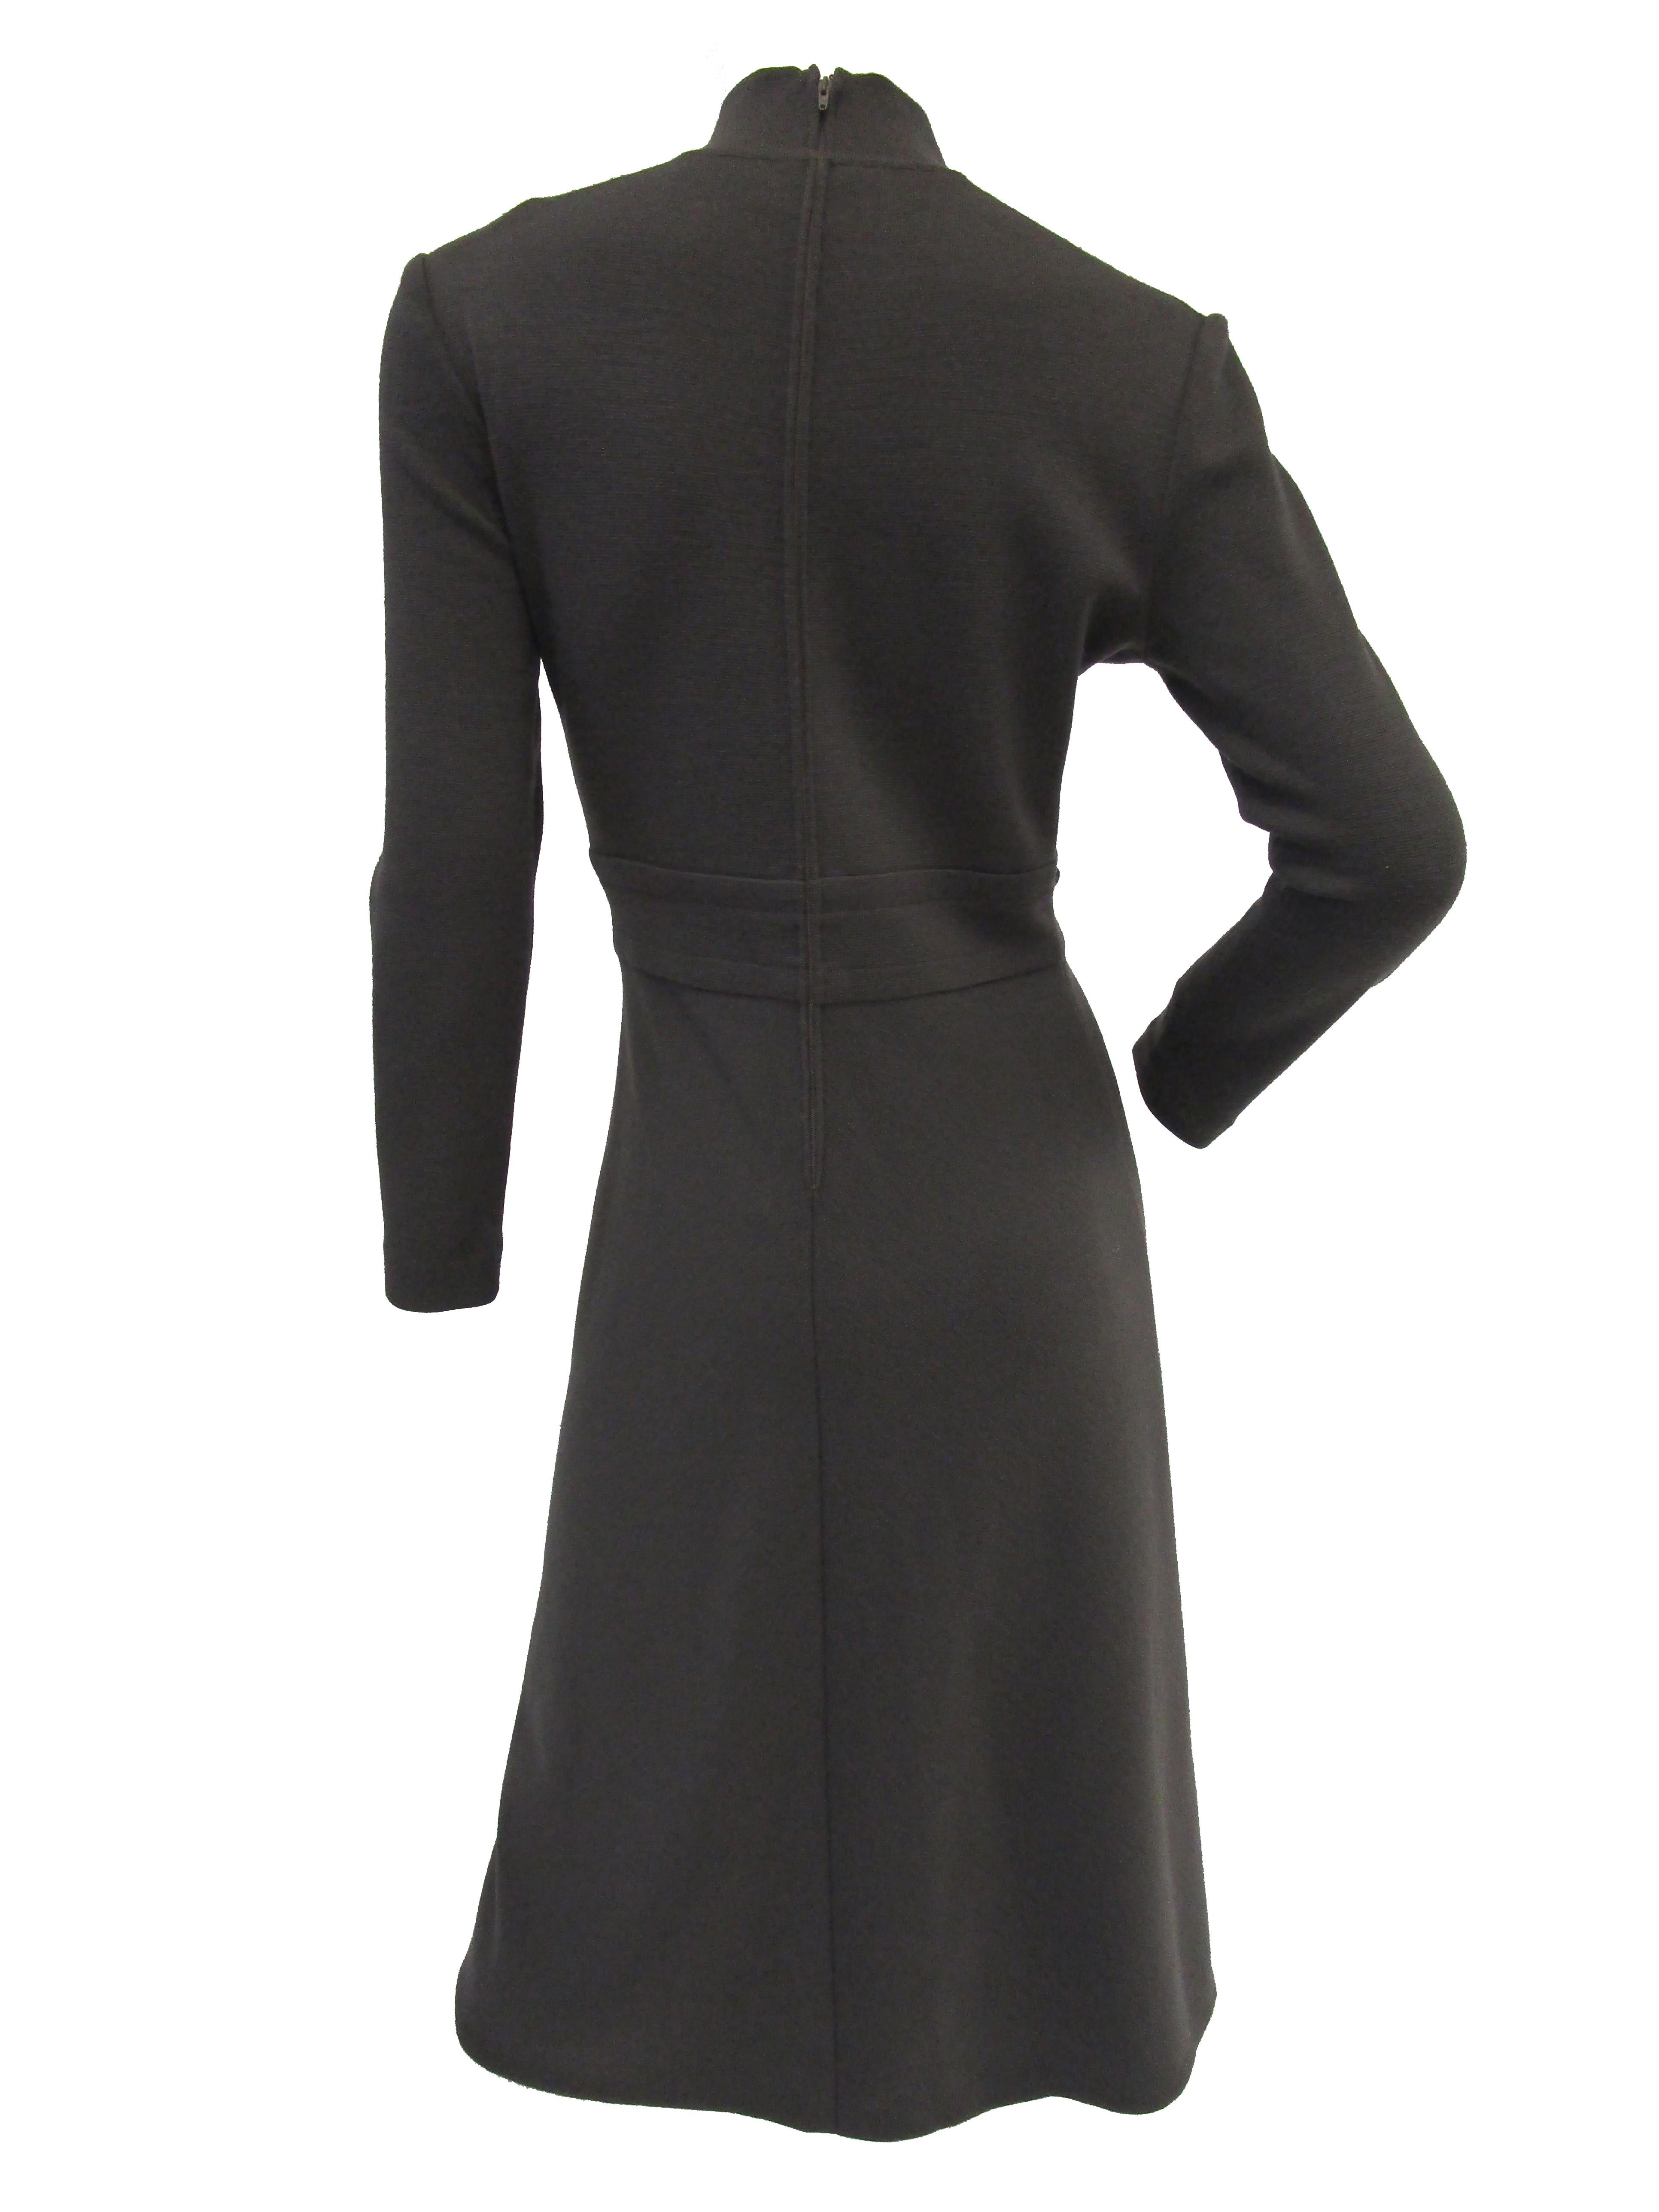 Amazing 1960s Cisa of Italy Grey Mod Dress & Cape Ensemble  In Excellent Condition For Sale In Houston, TX